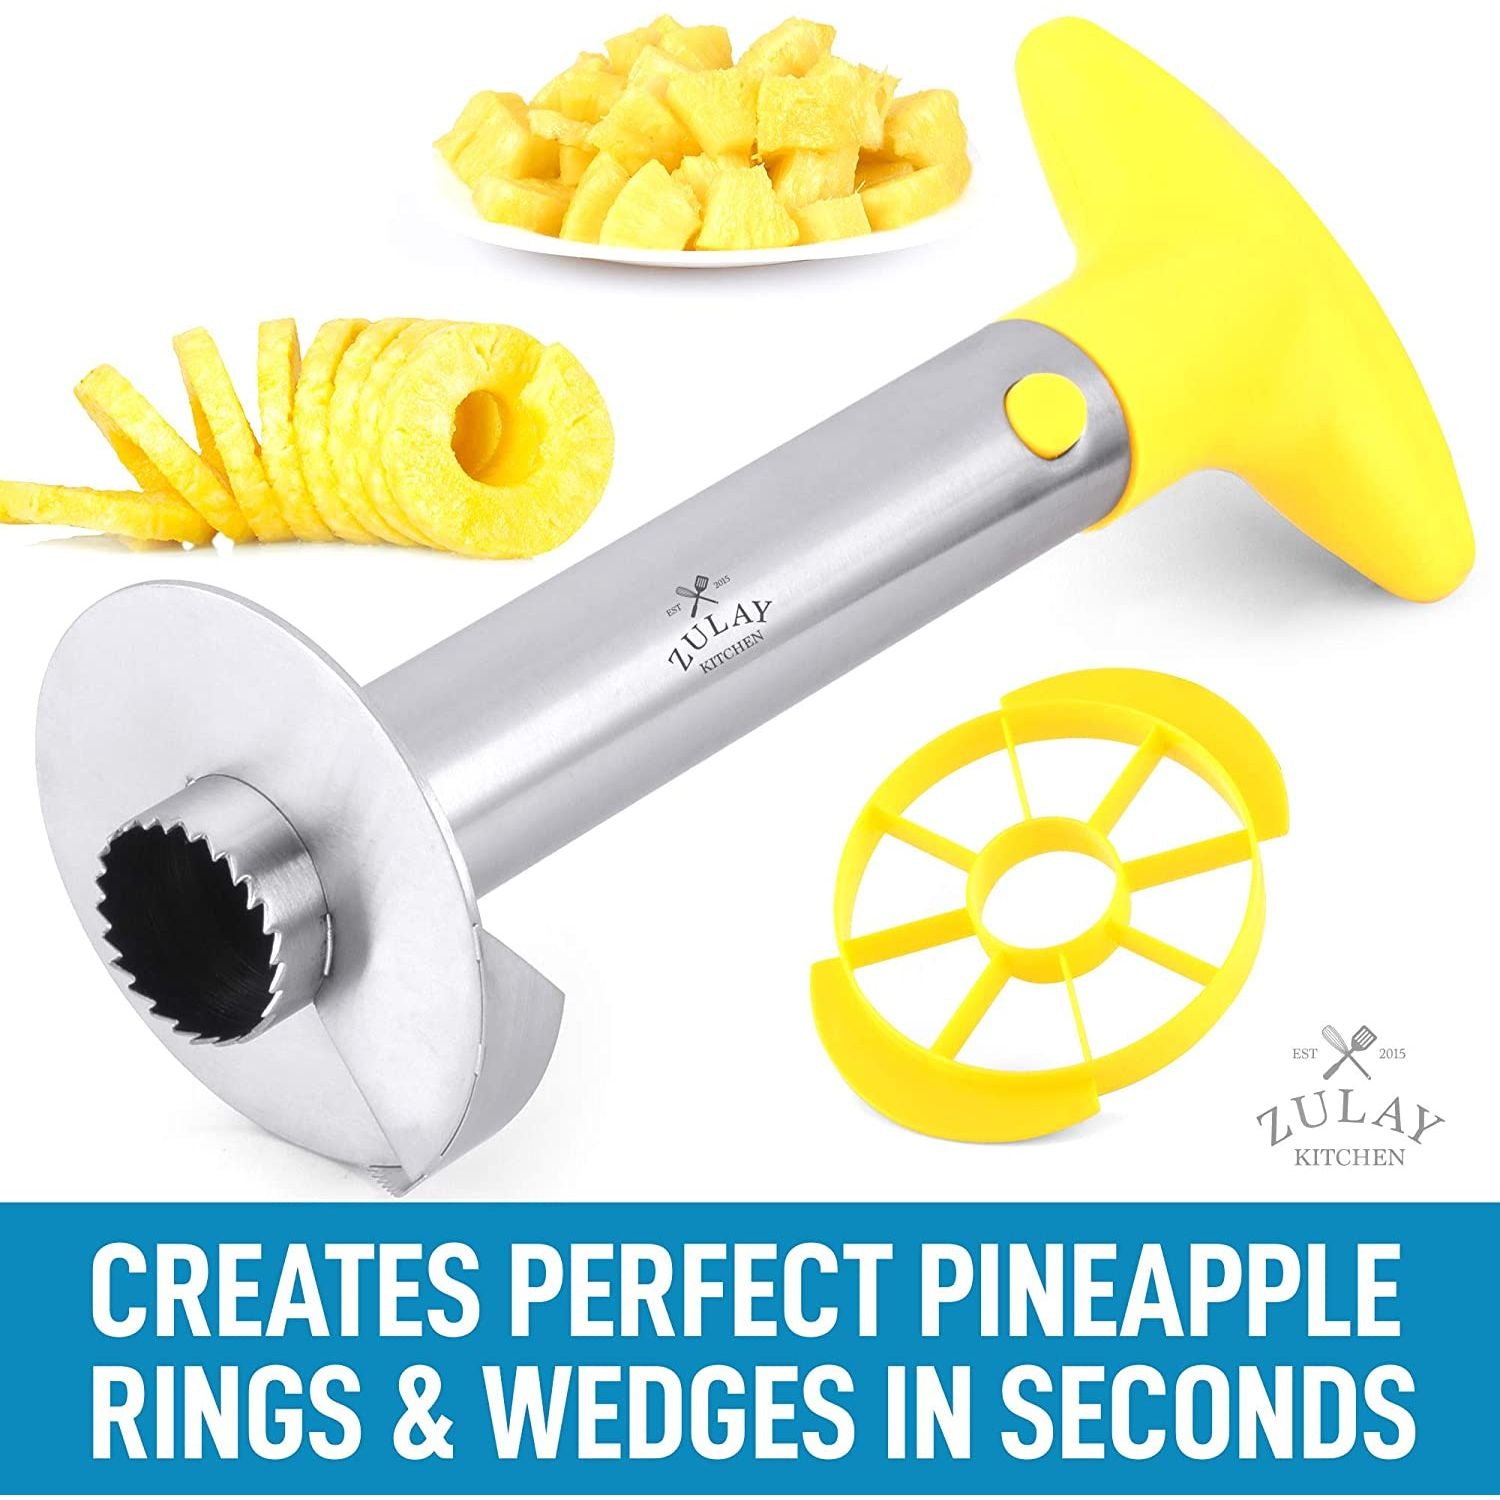 Zulay Kitchen Pineapple Corer and Slicer Tool Set - Yellow, 1